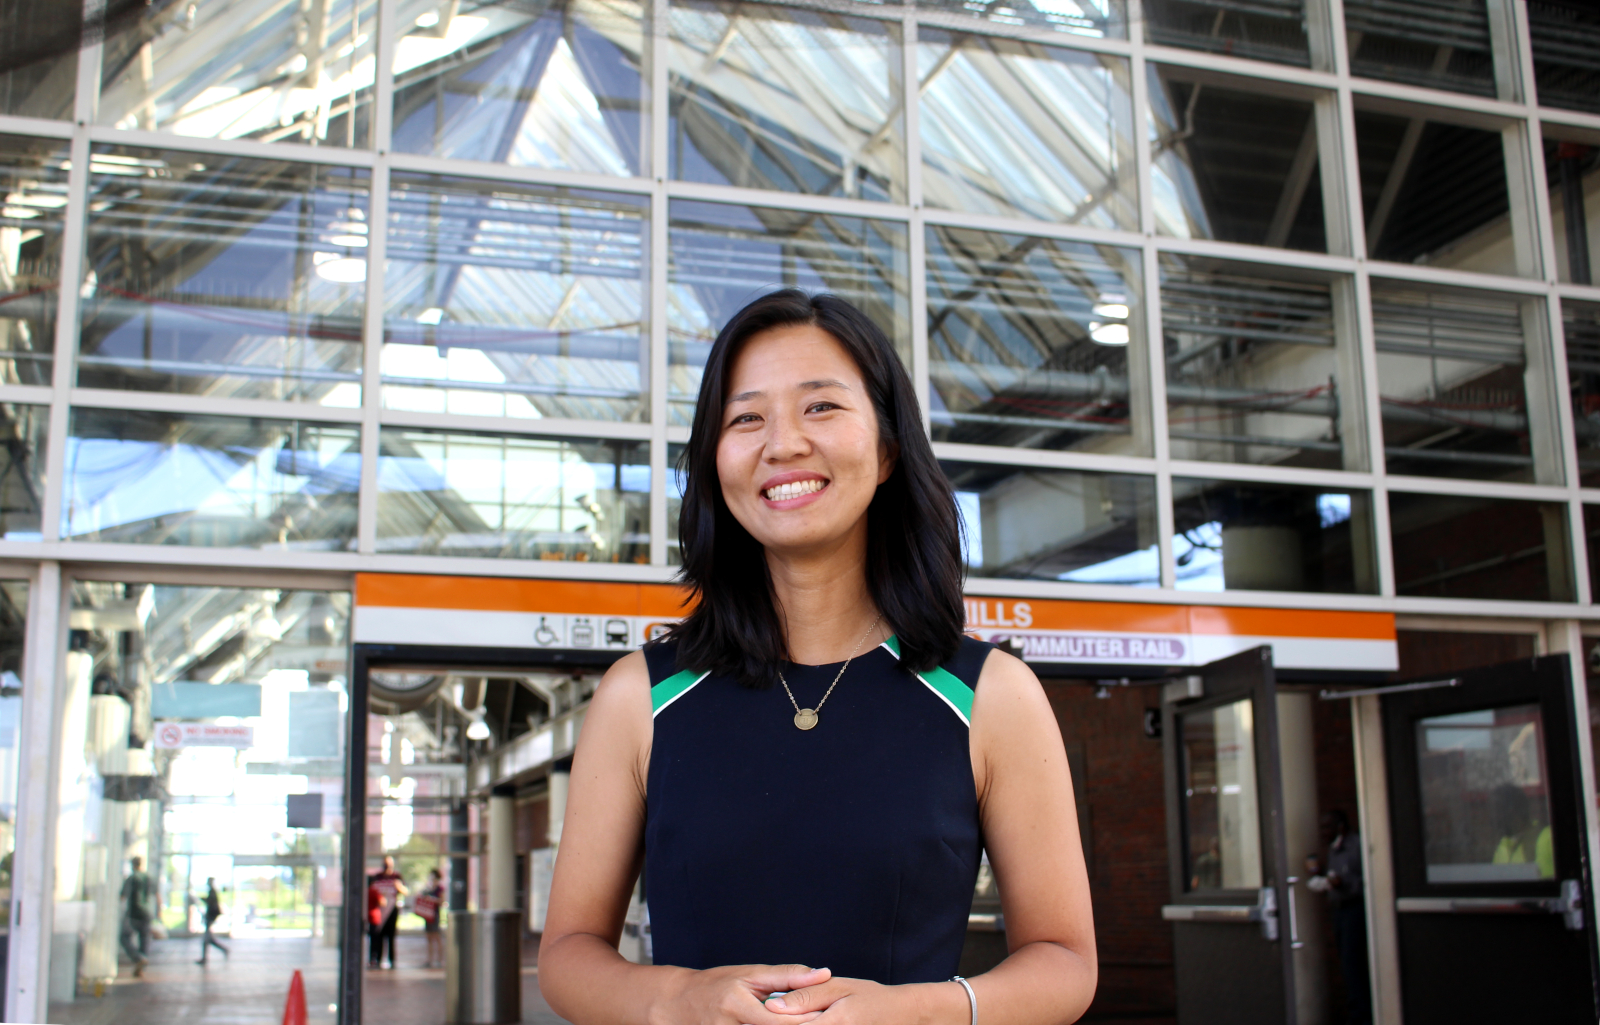 Boston City Councilor and mayoral candidate Michelle Wu in front of the entrance to the Forest Hills T station